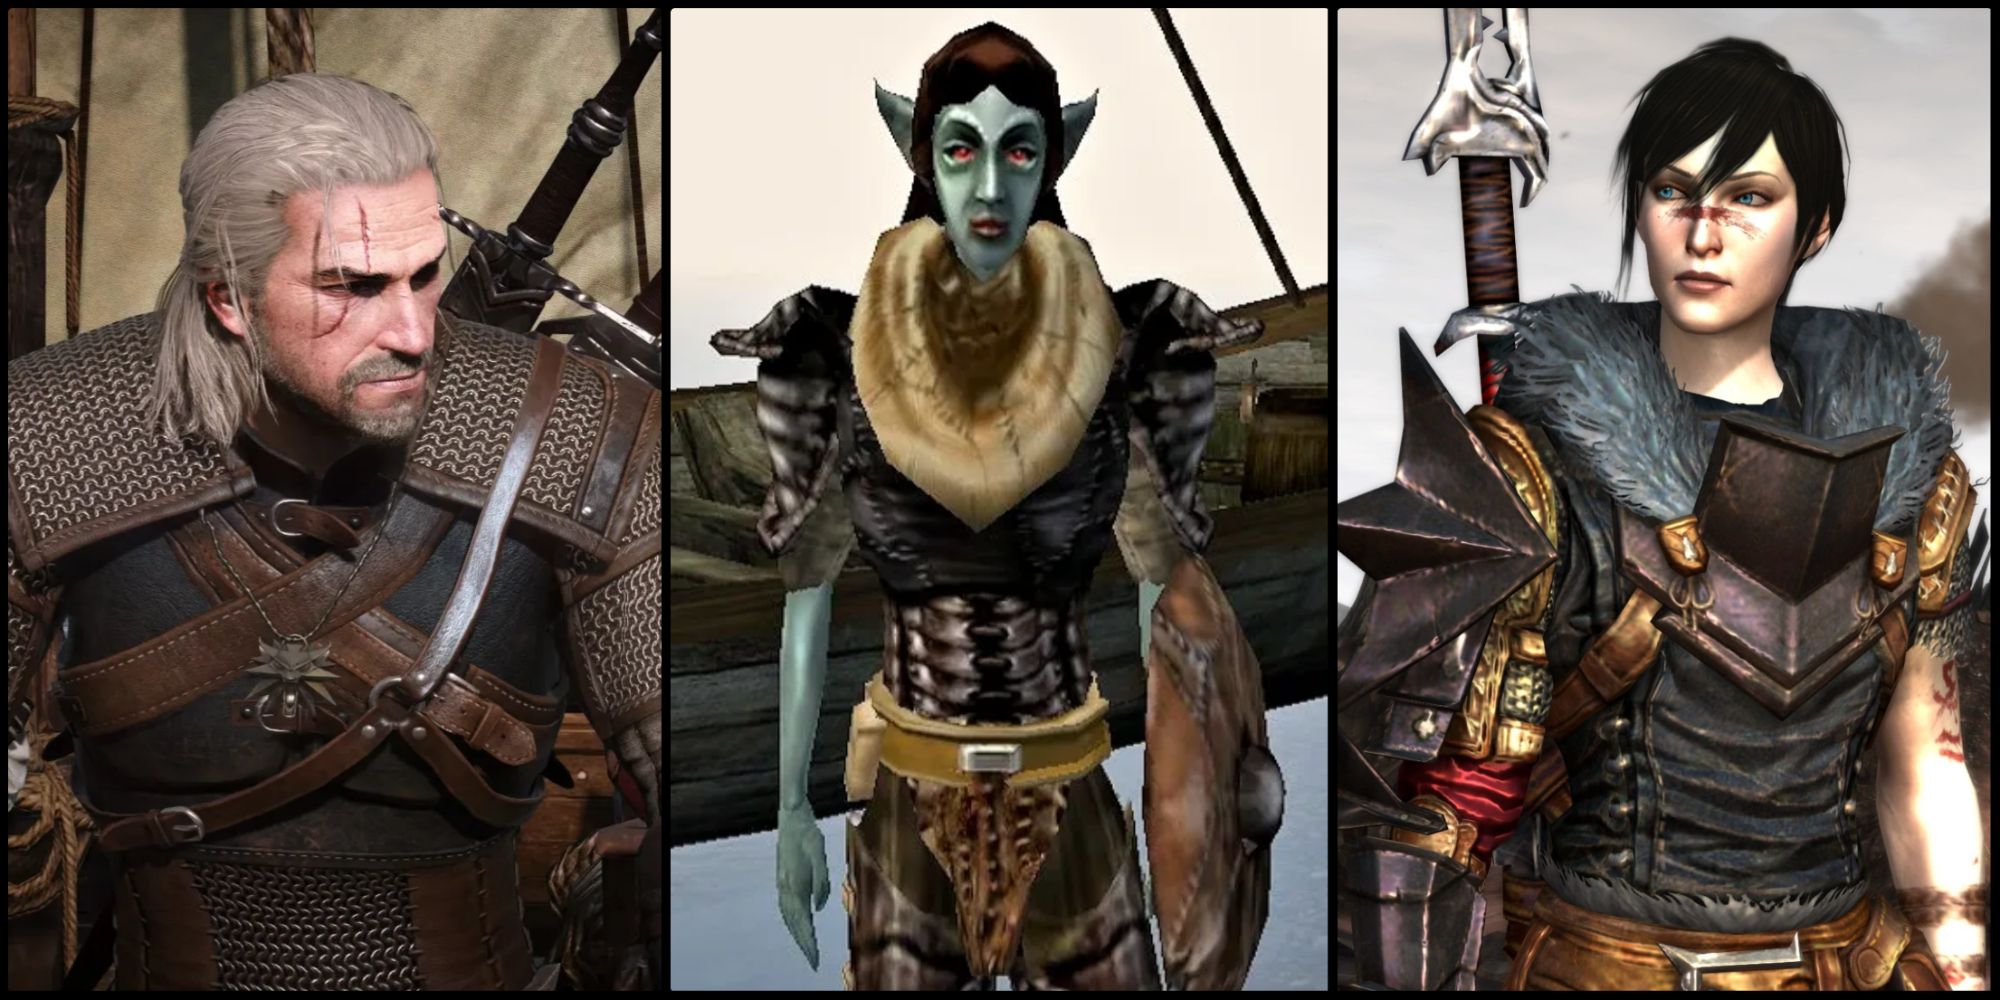 The protagonists of The Witcher and Dragon Age 2 with an NPC from Morrowind